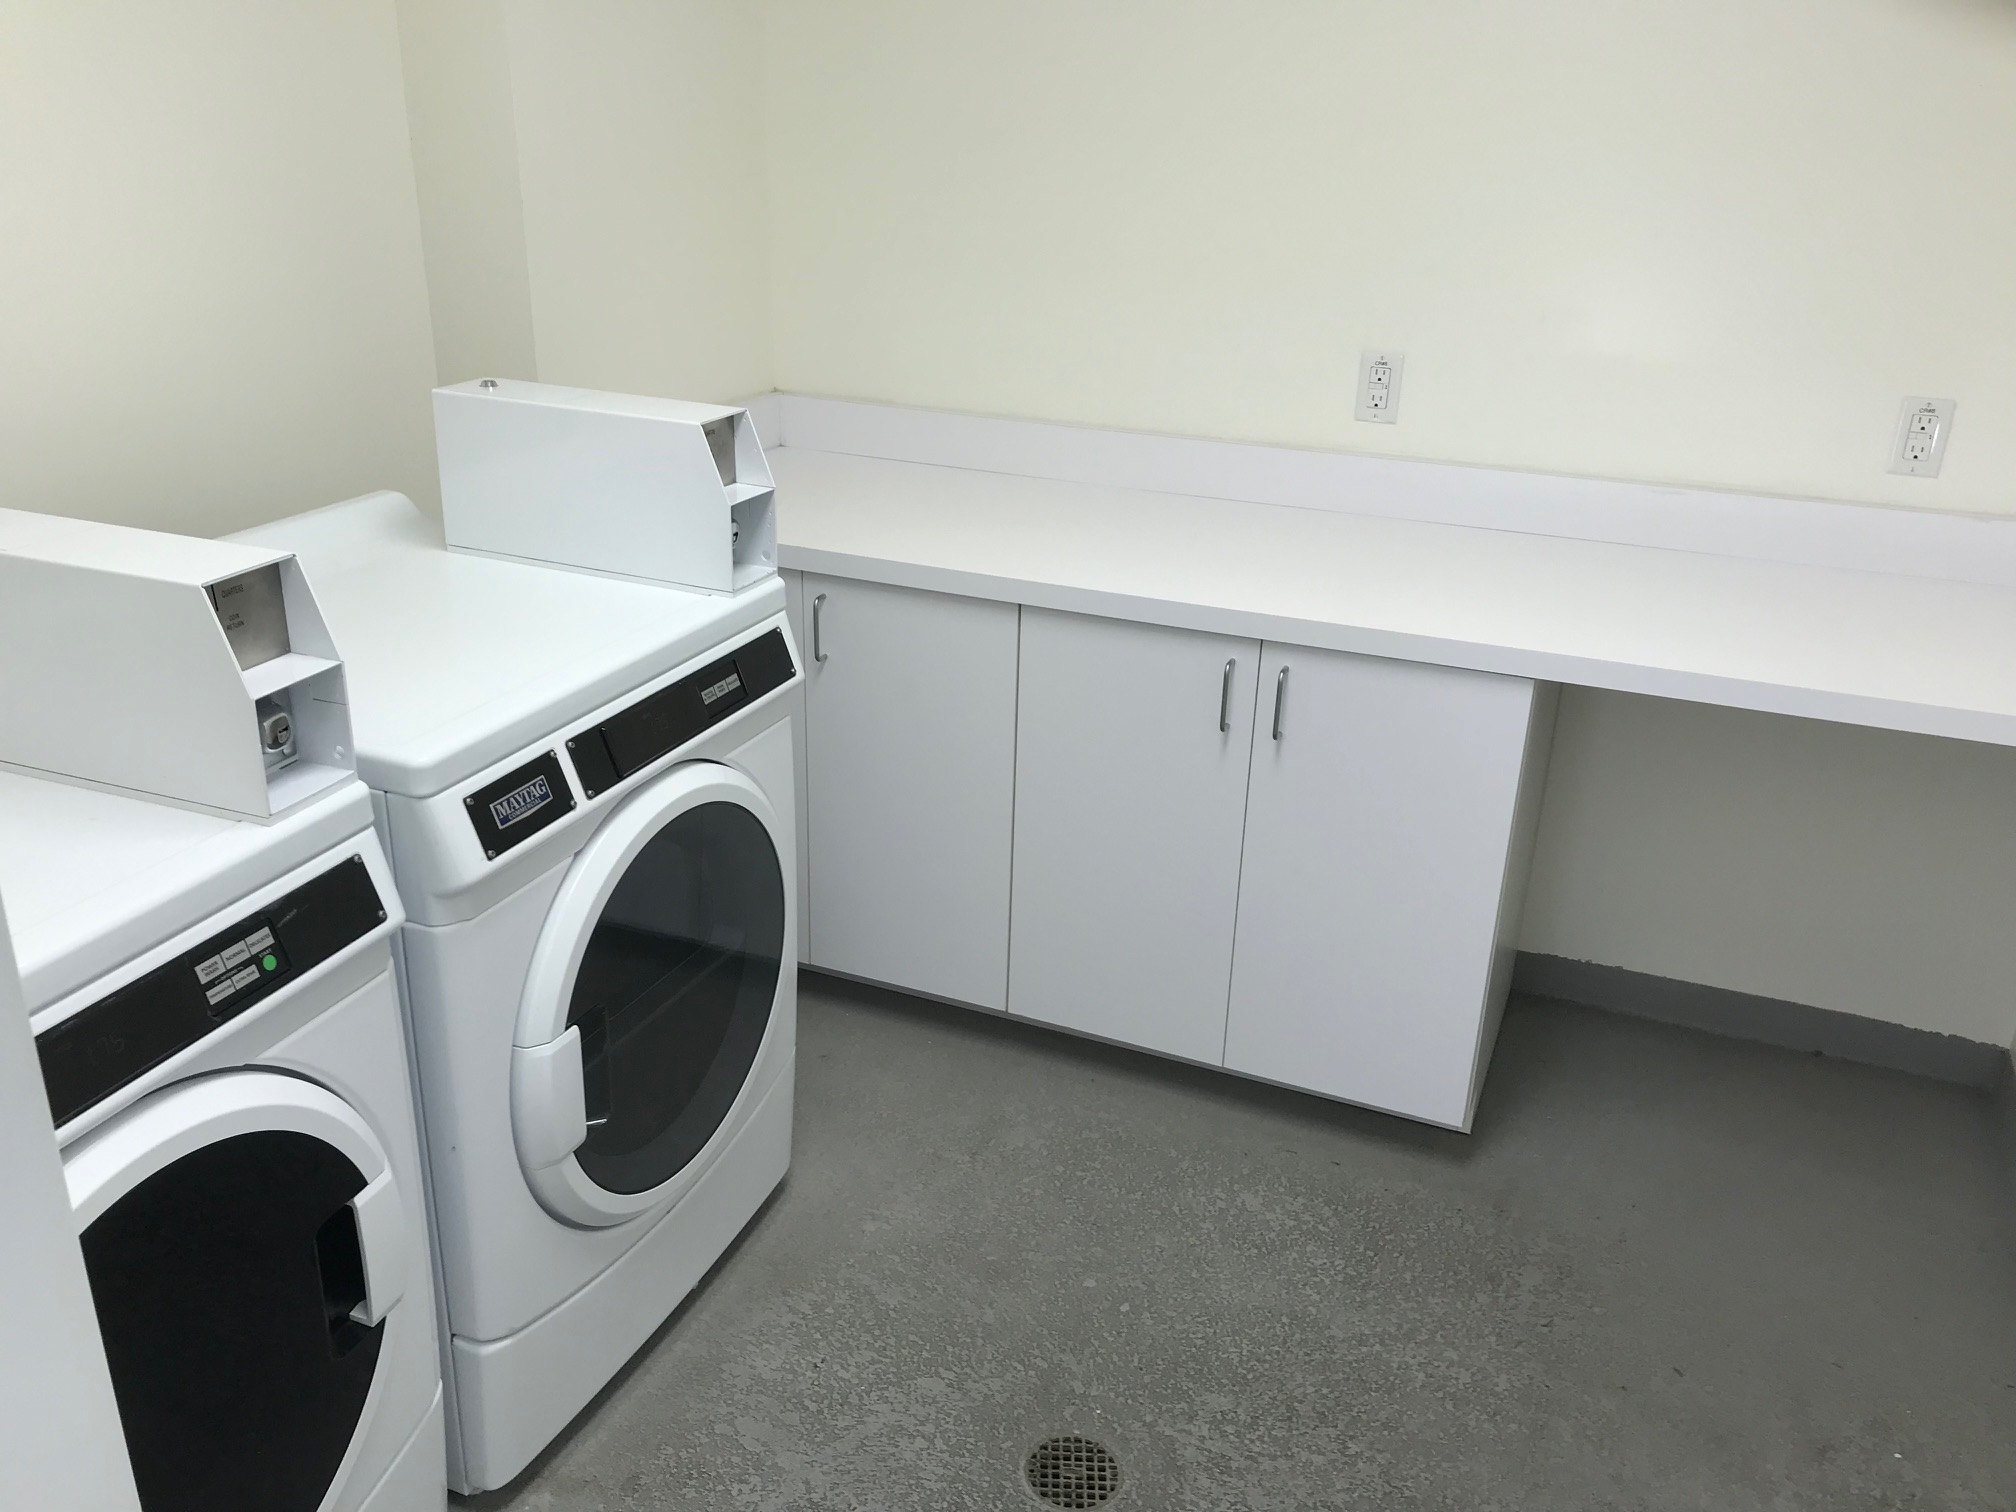 View of the laundry room at King 1101 Apartments showing two machines and a long counter with cabinets underneath